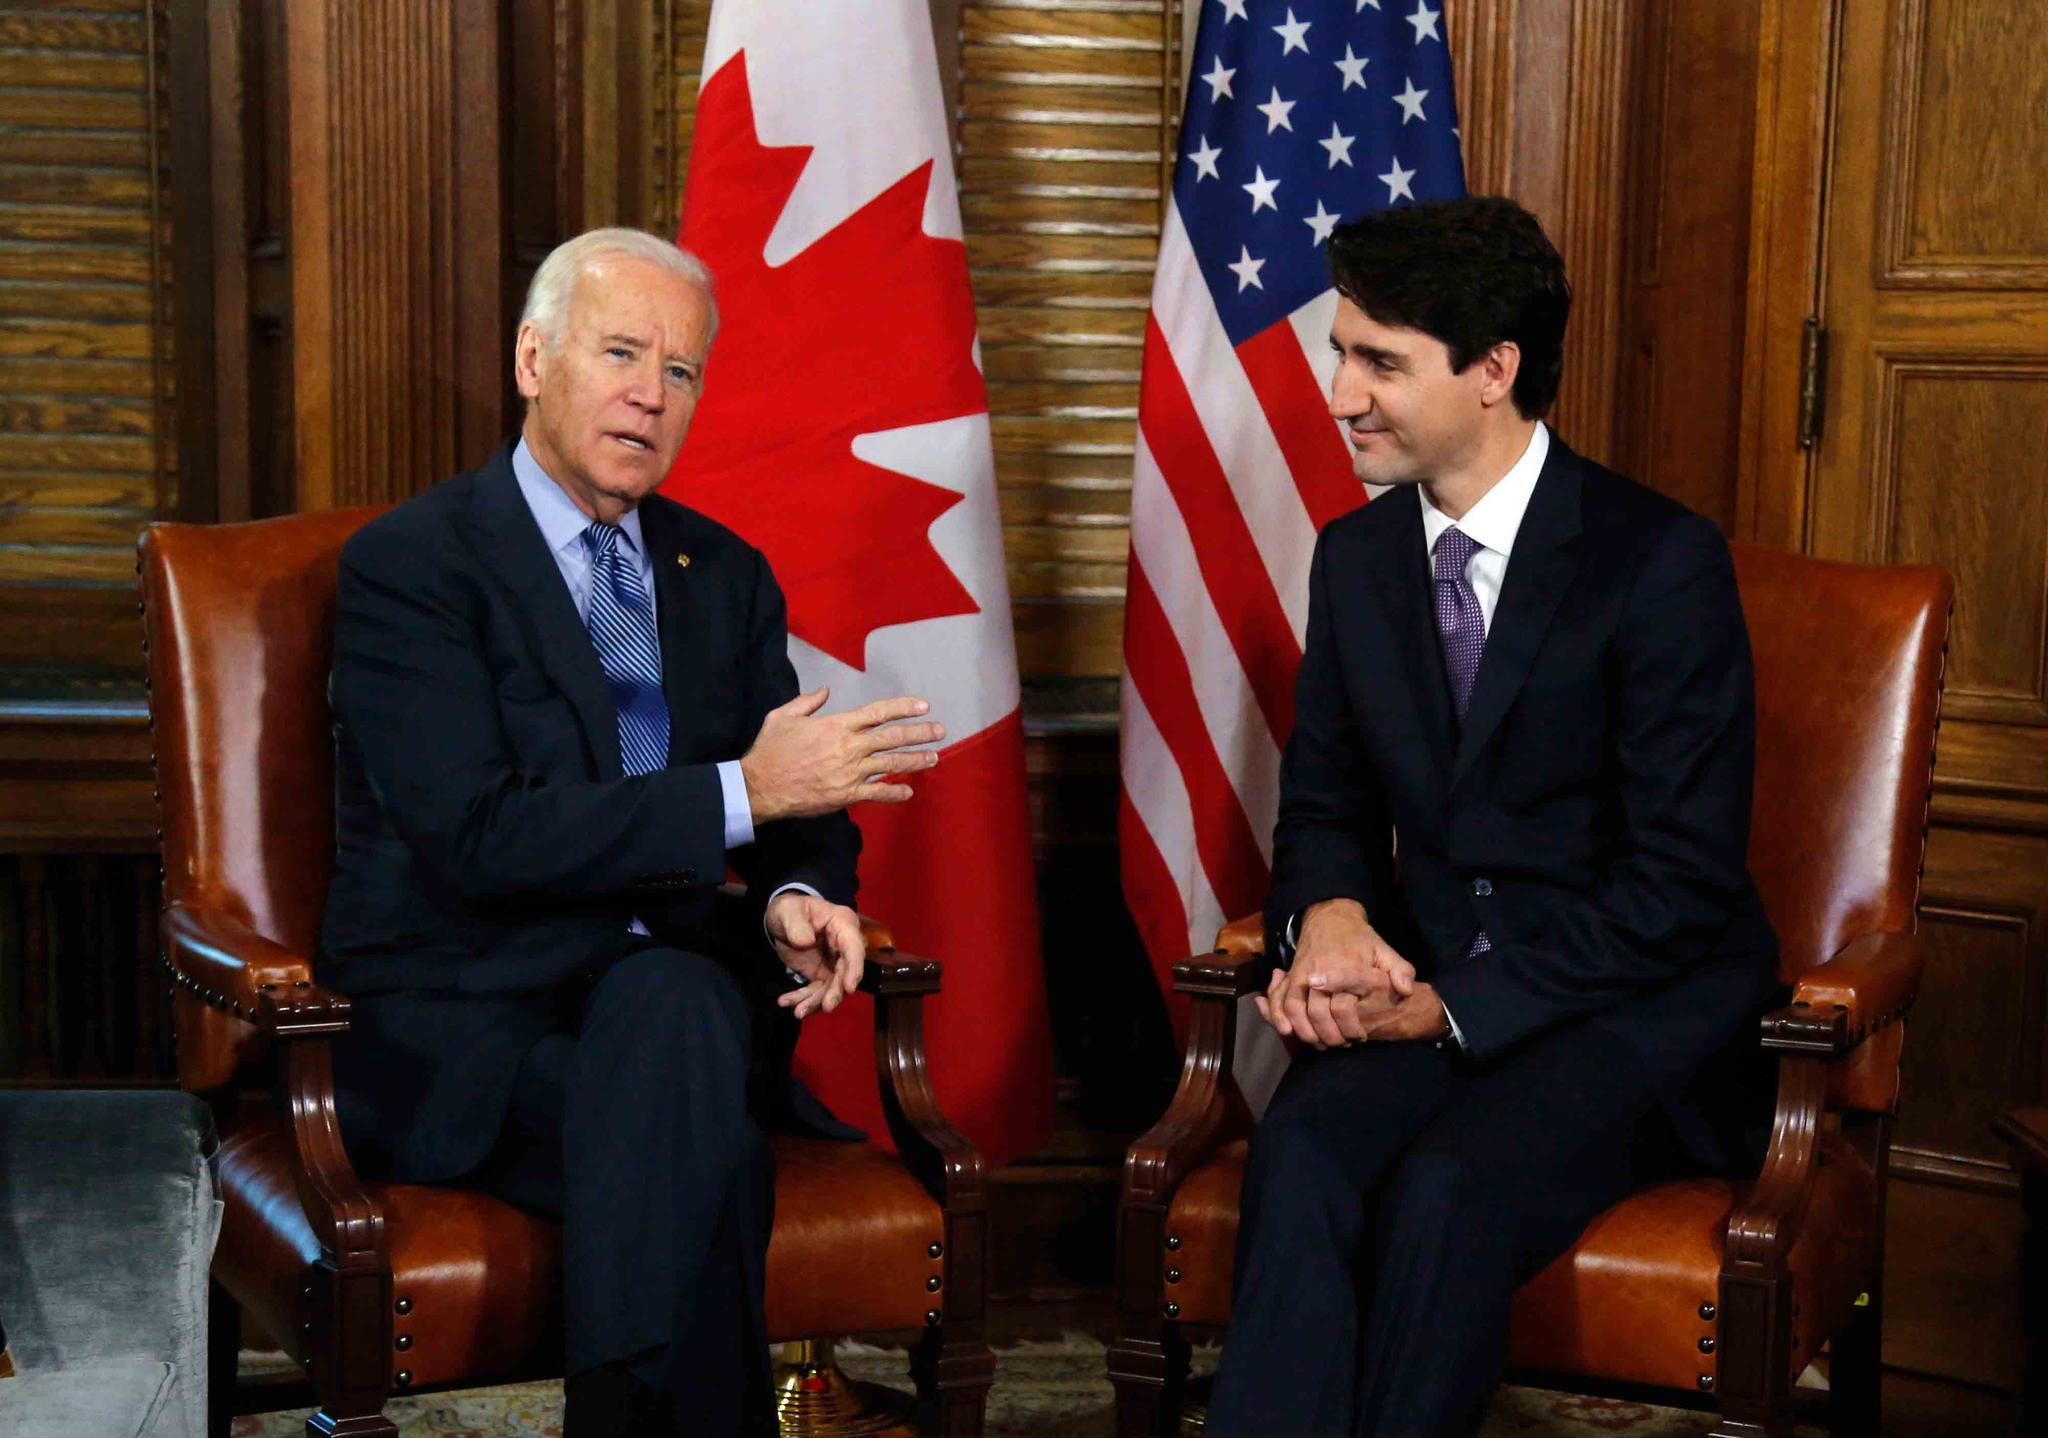  Canadian Prime Minister Justin Trudeau meets with then U.S. Vice President Joe Biden on Parliament Hill in Ottawa.